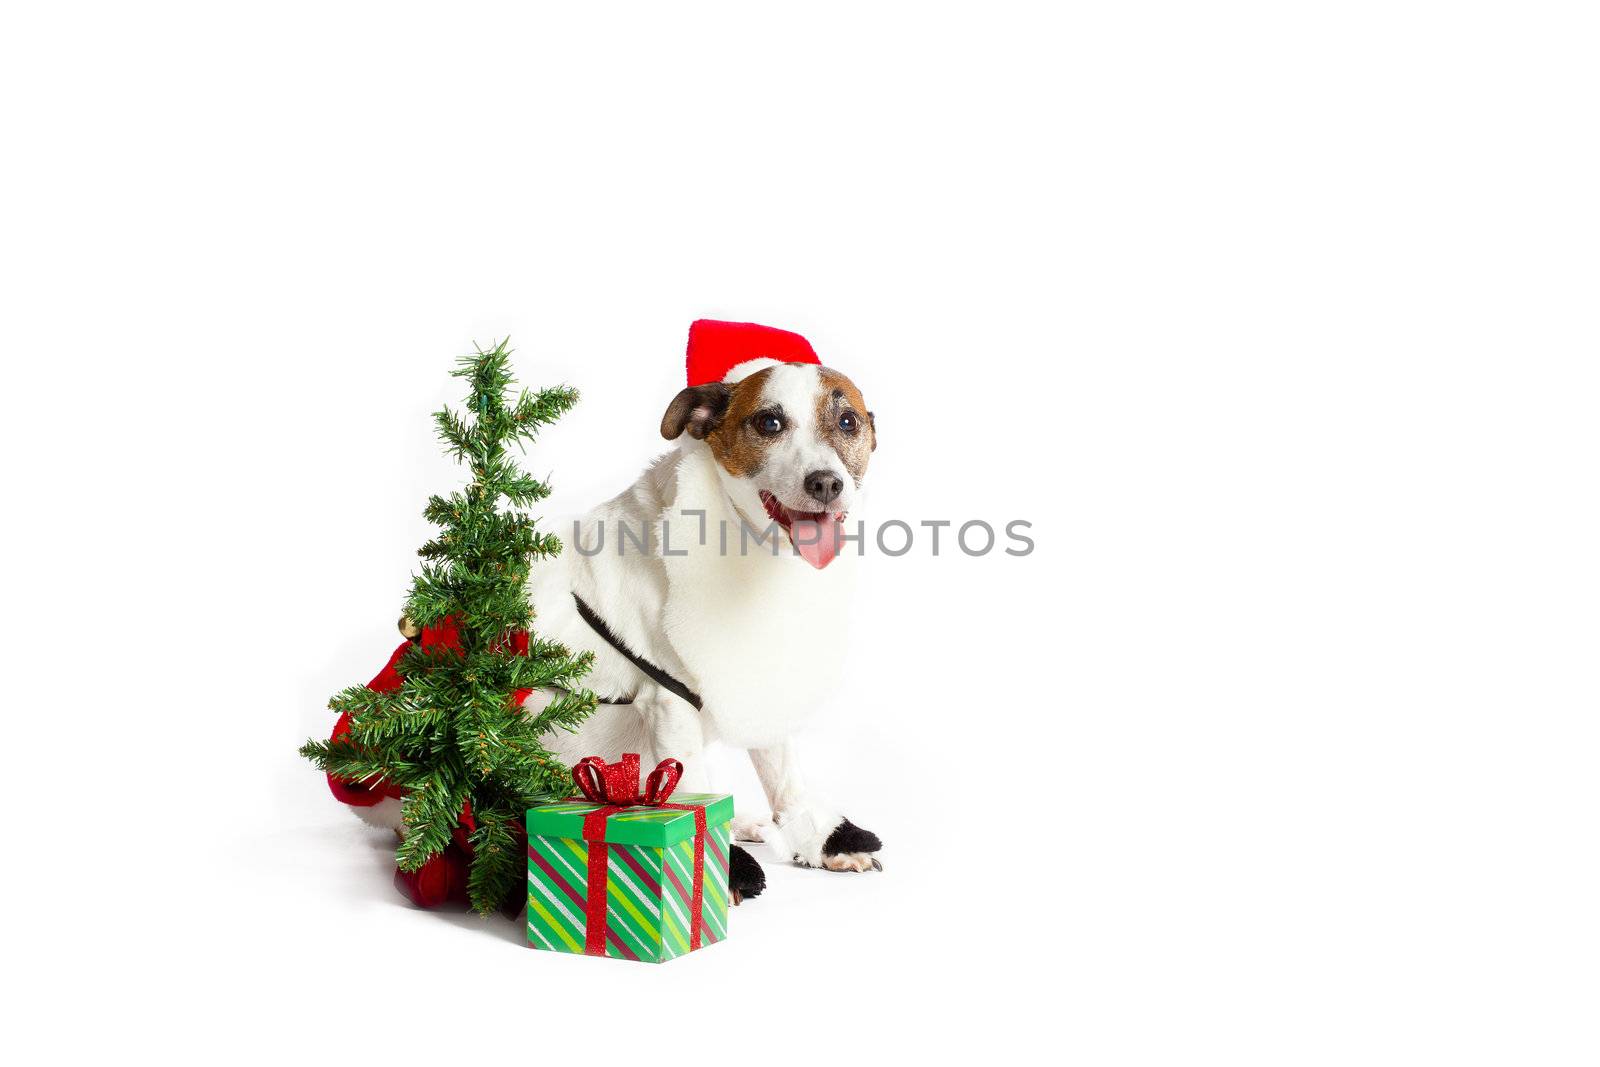 A Jack Russell dressed up as Santa with a tiny Christmas tree and a present